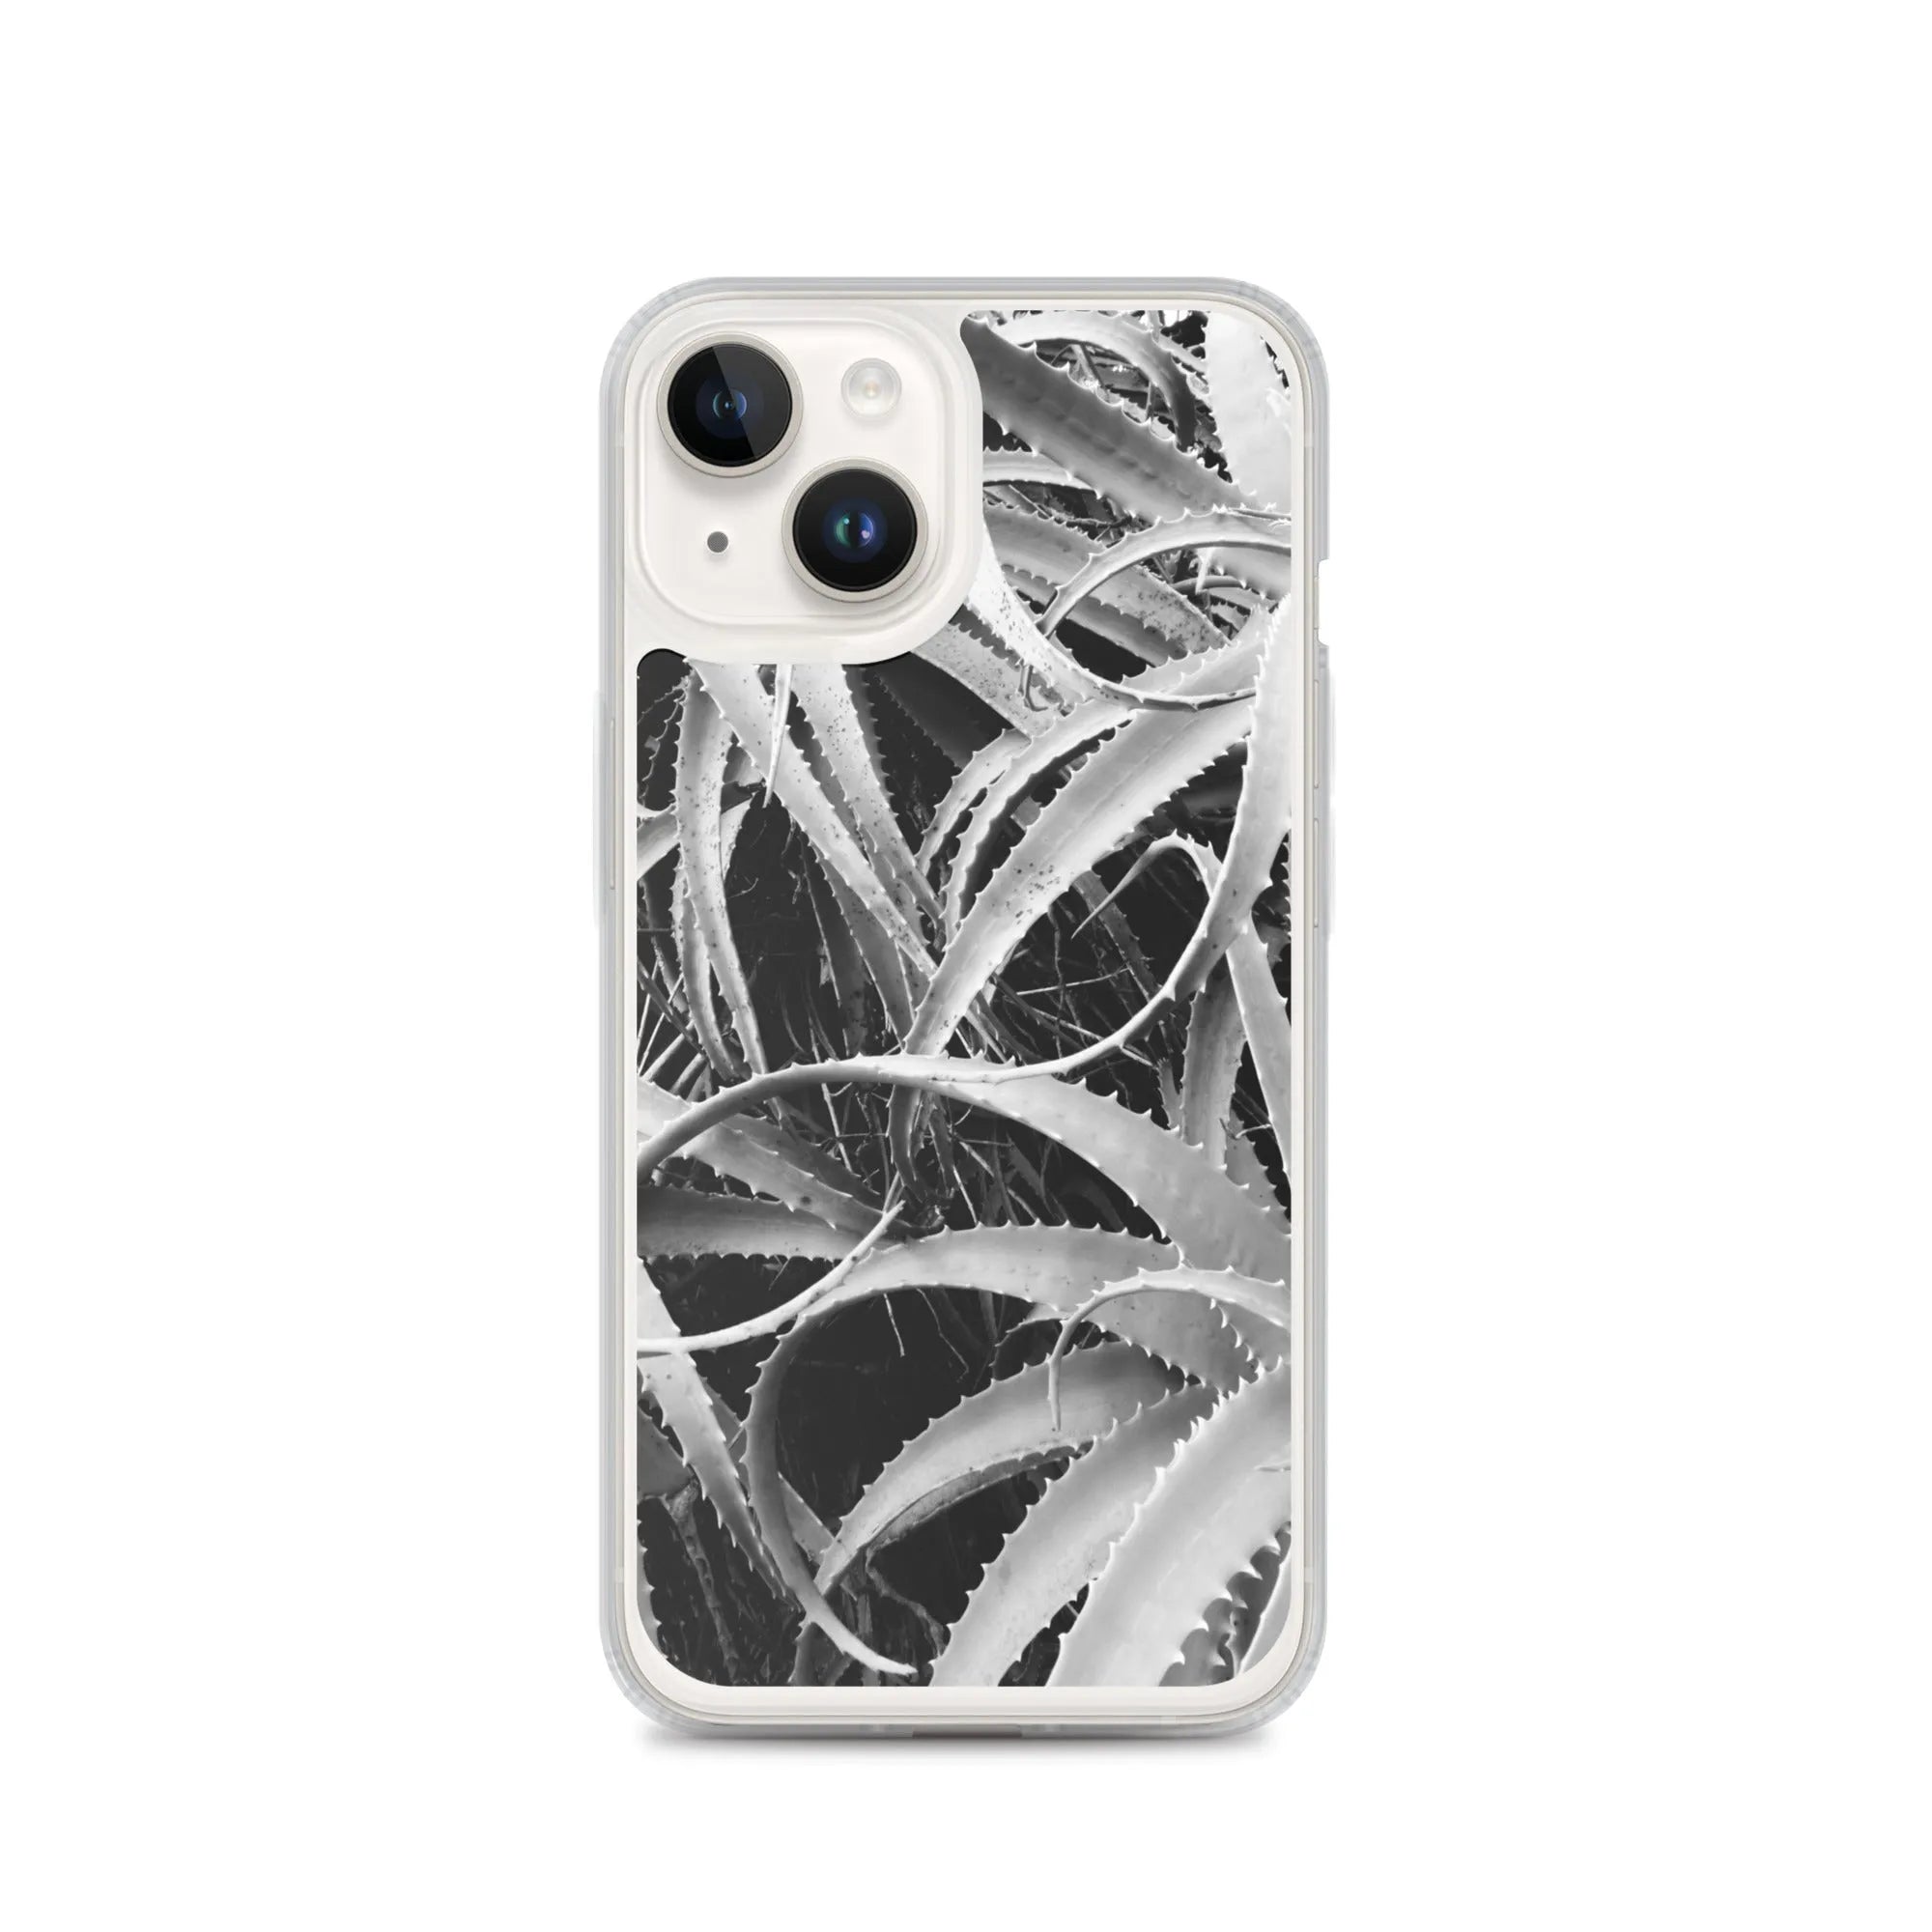 Spiked 2 + Too Botanical Art Iphone Case - Black And White - Iphone 14 - Mobile Phone Cases - Aesthetic Art